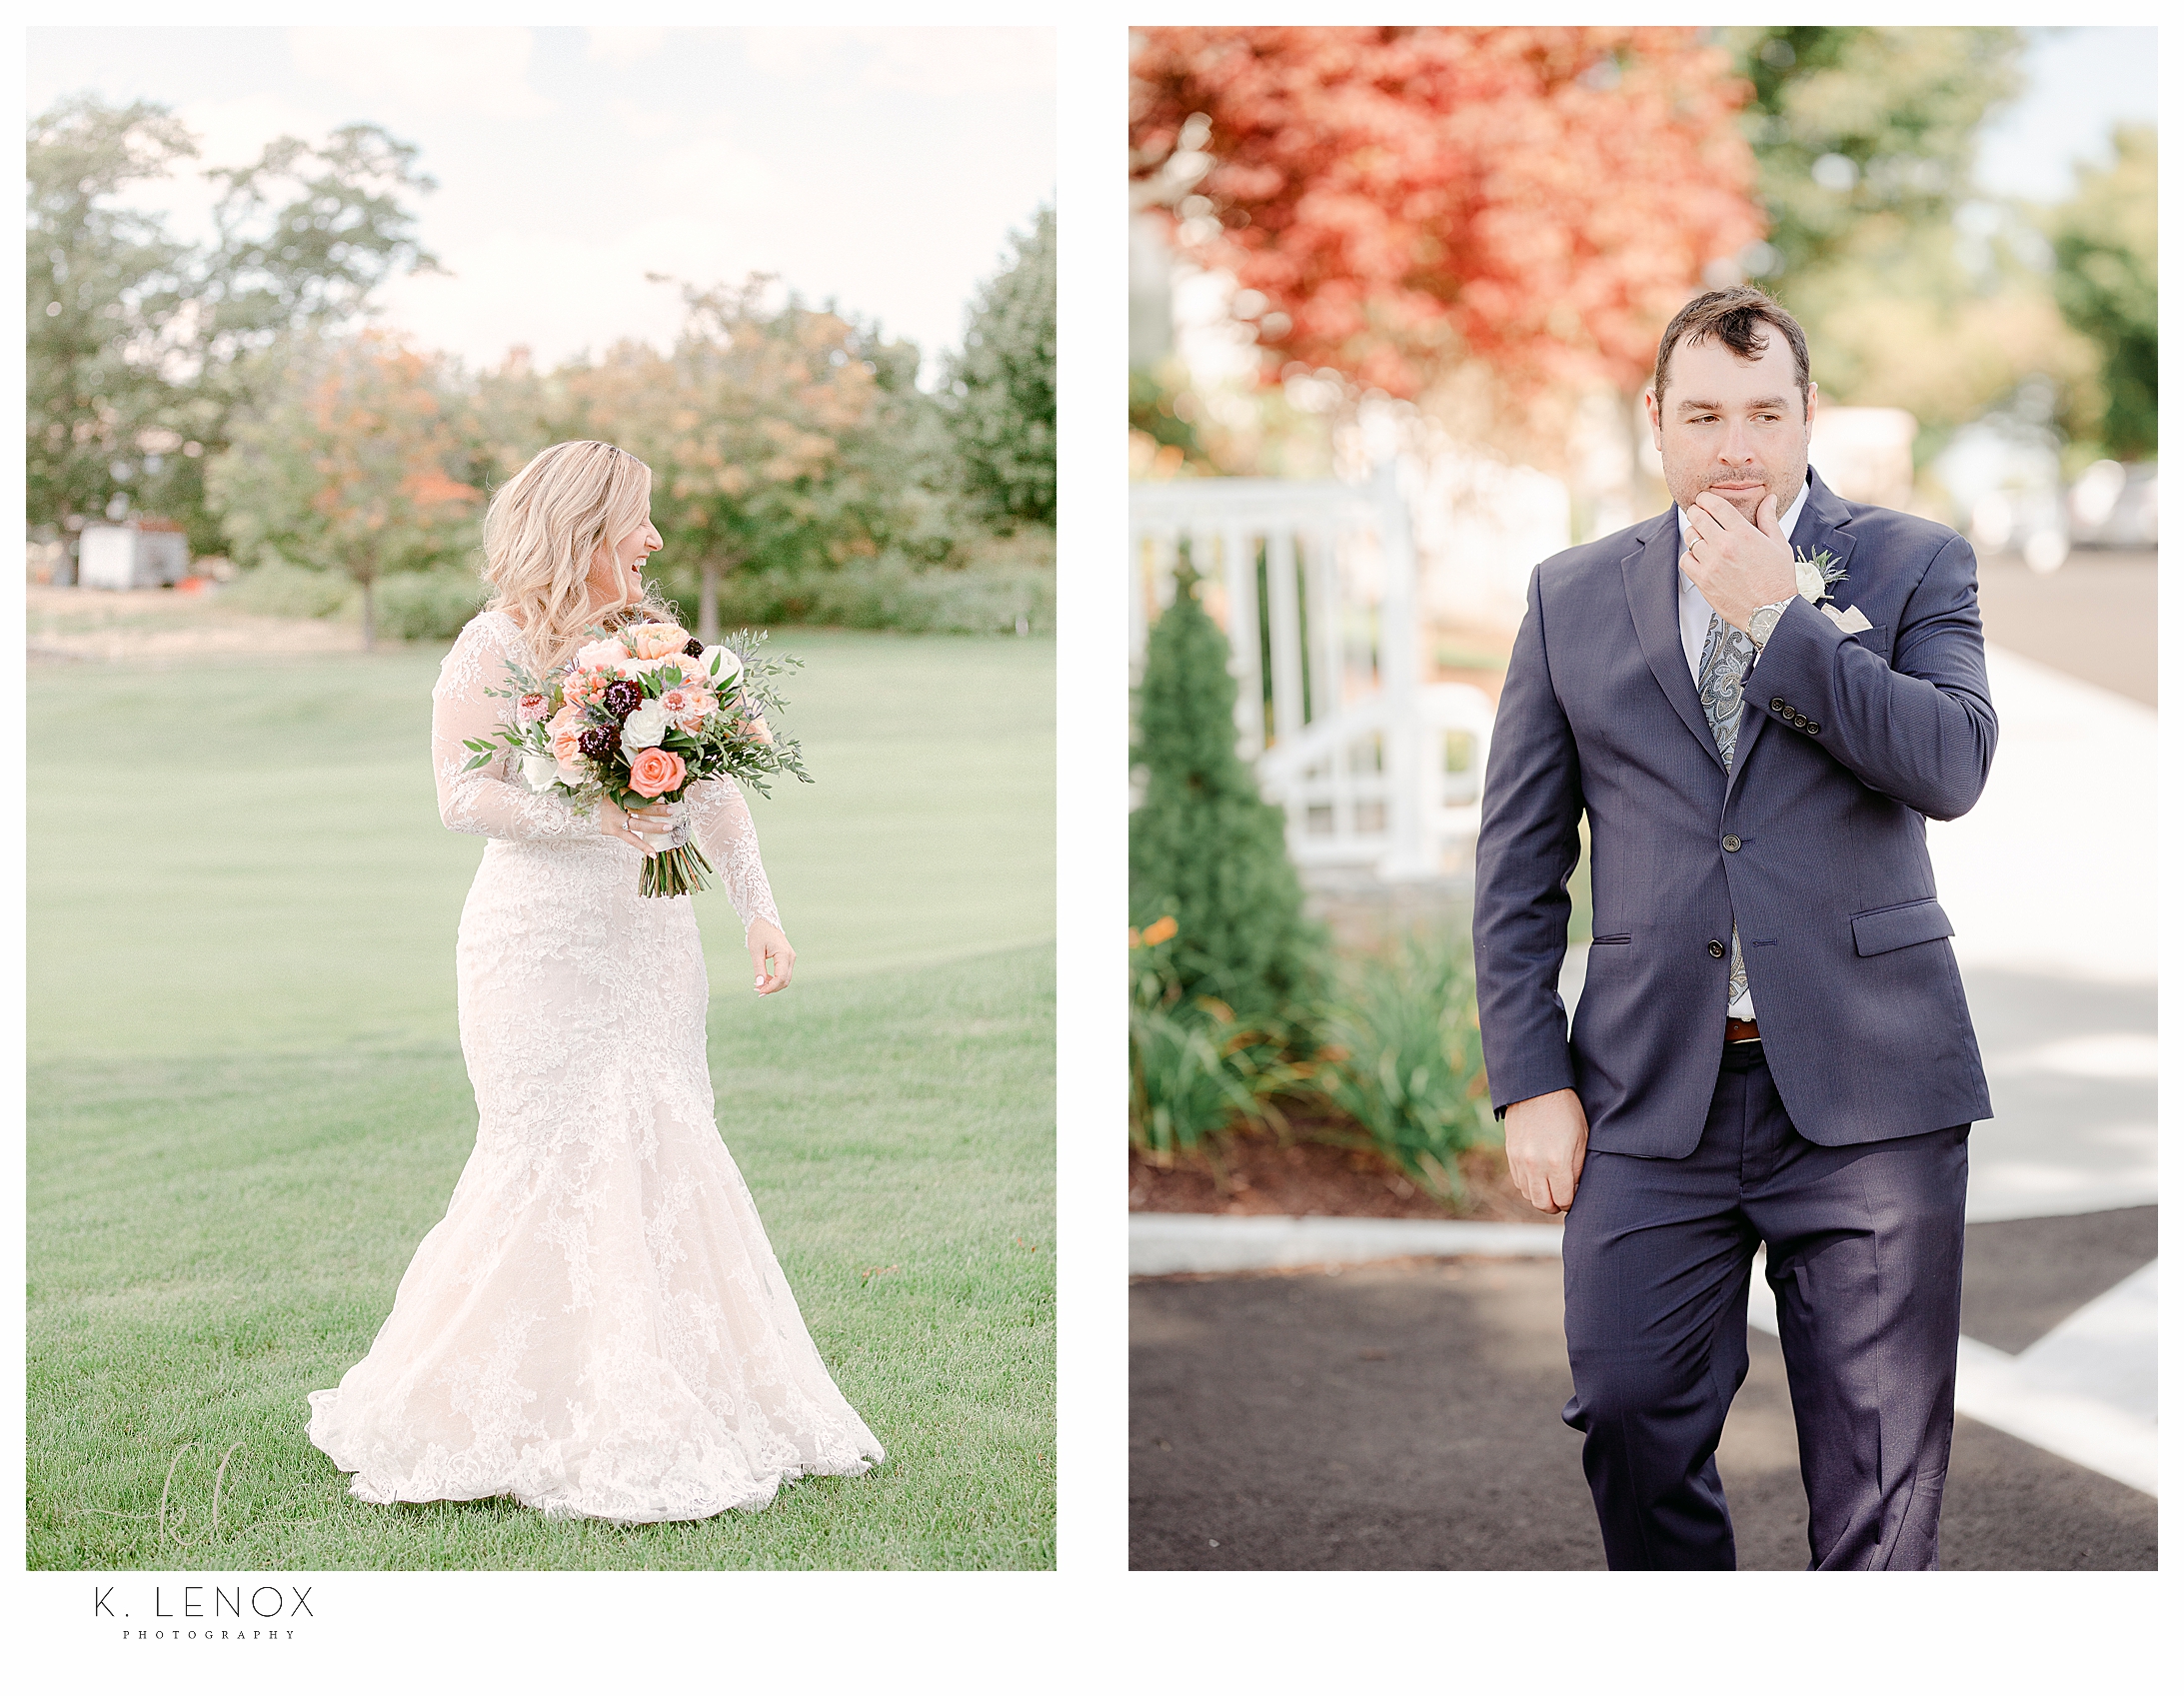 Light and Airy photos of a bride and groom at the Wentworth Country Club for their wedding. 